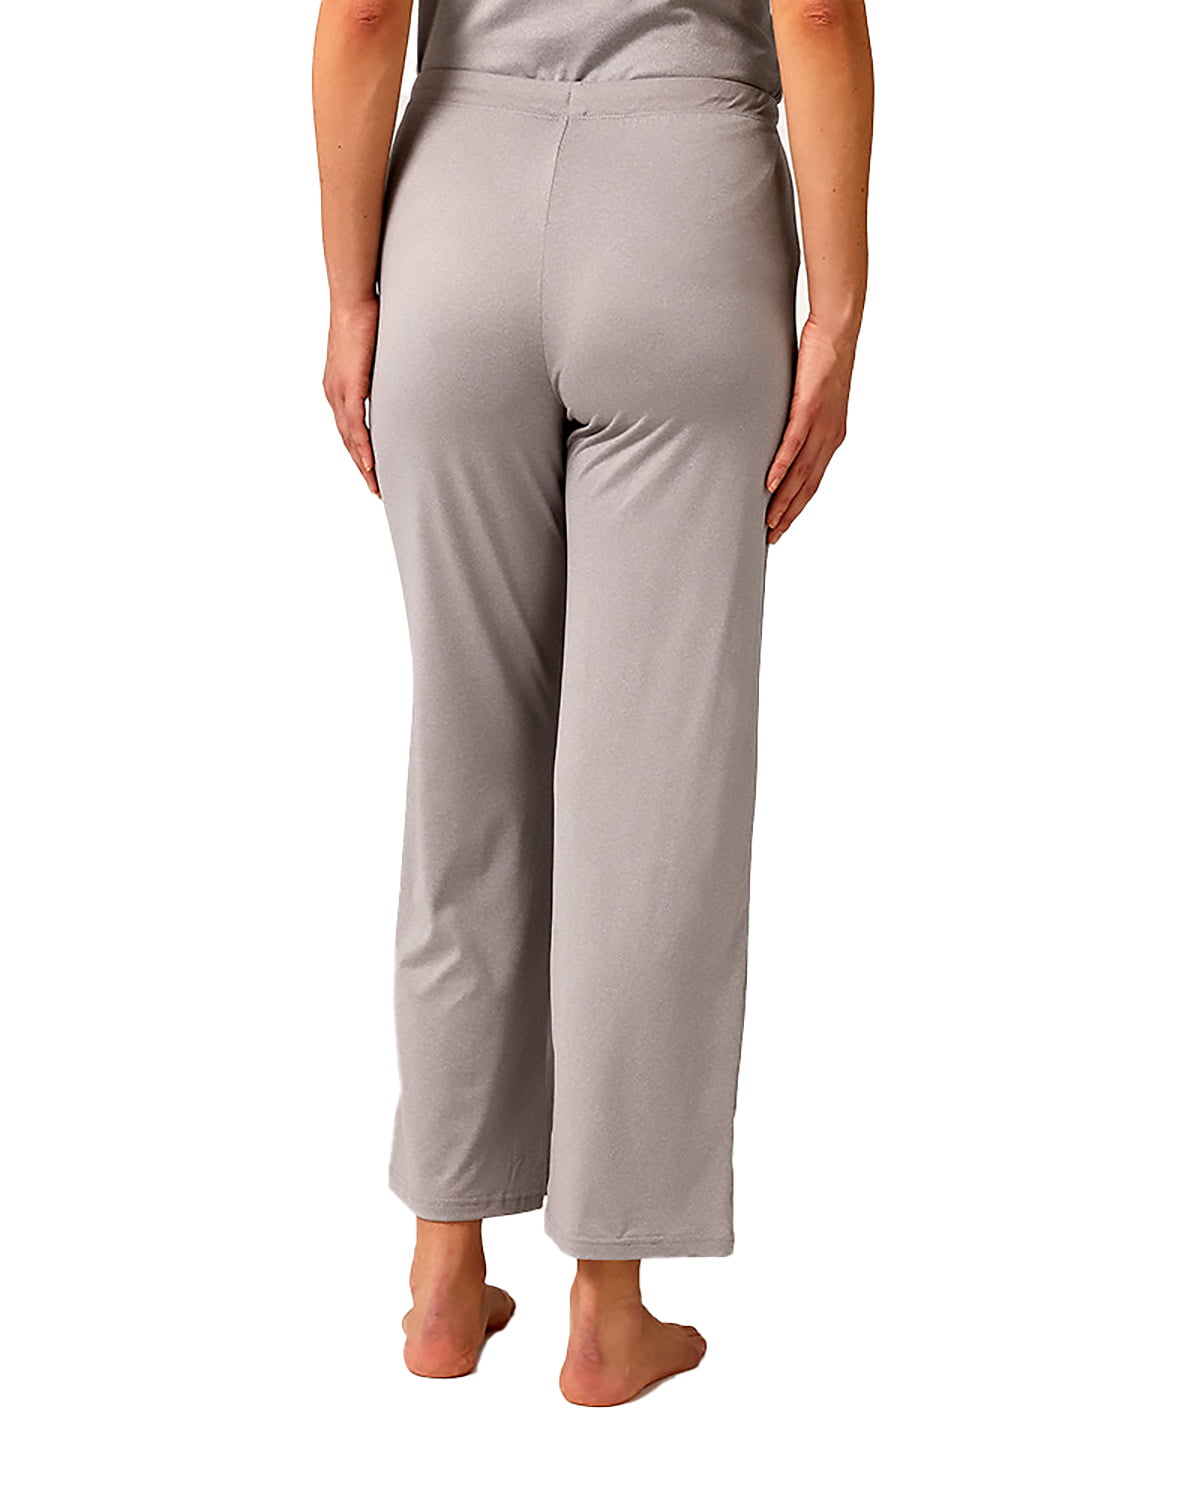 2 Pack 32 Degrees Women's Cool Lightweight Relaxed Fit Sleep Pant